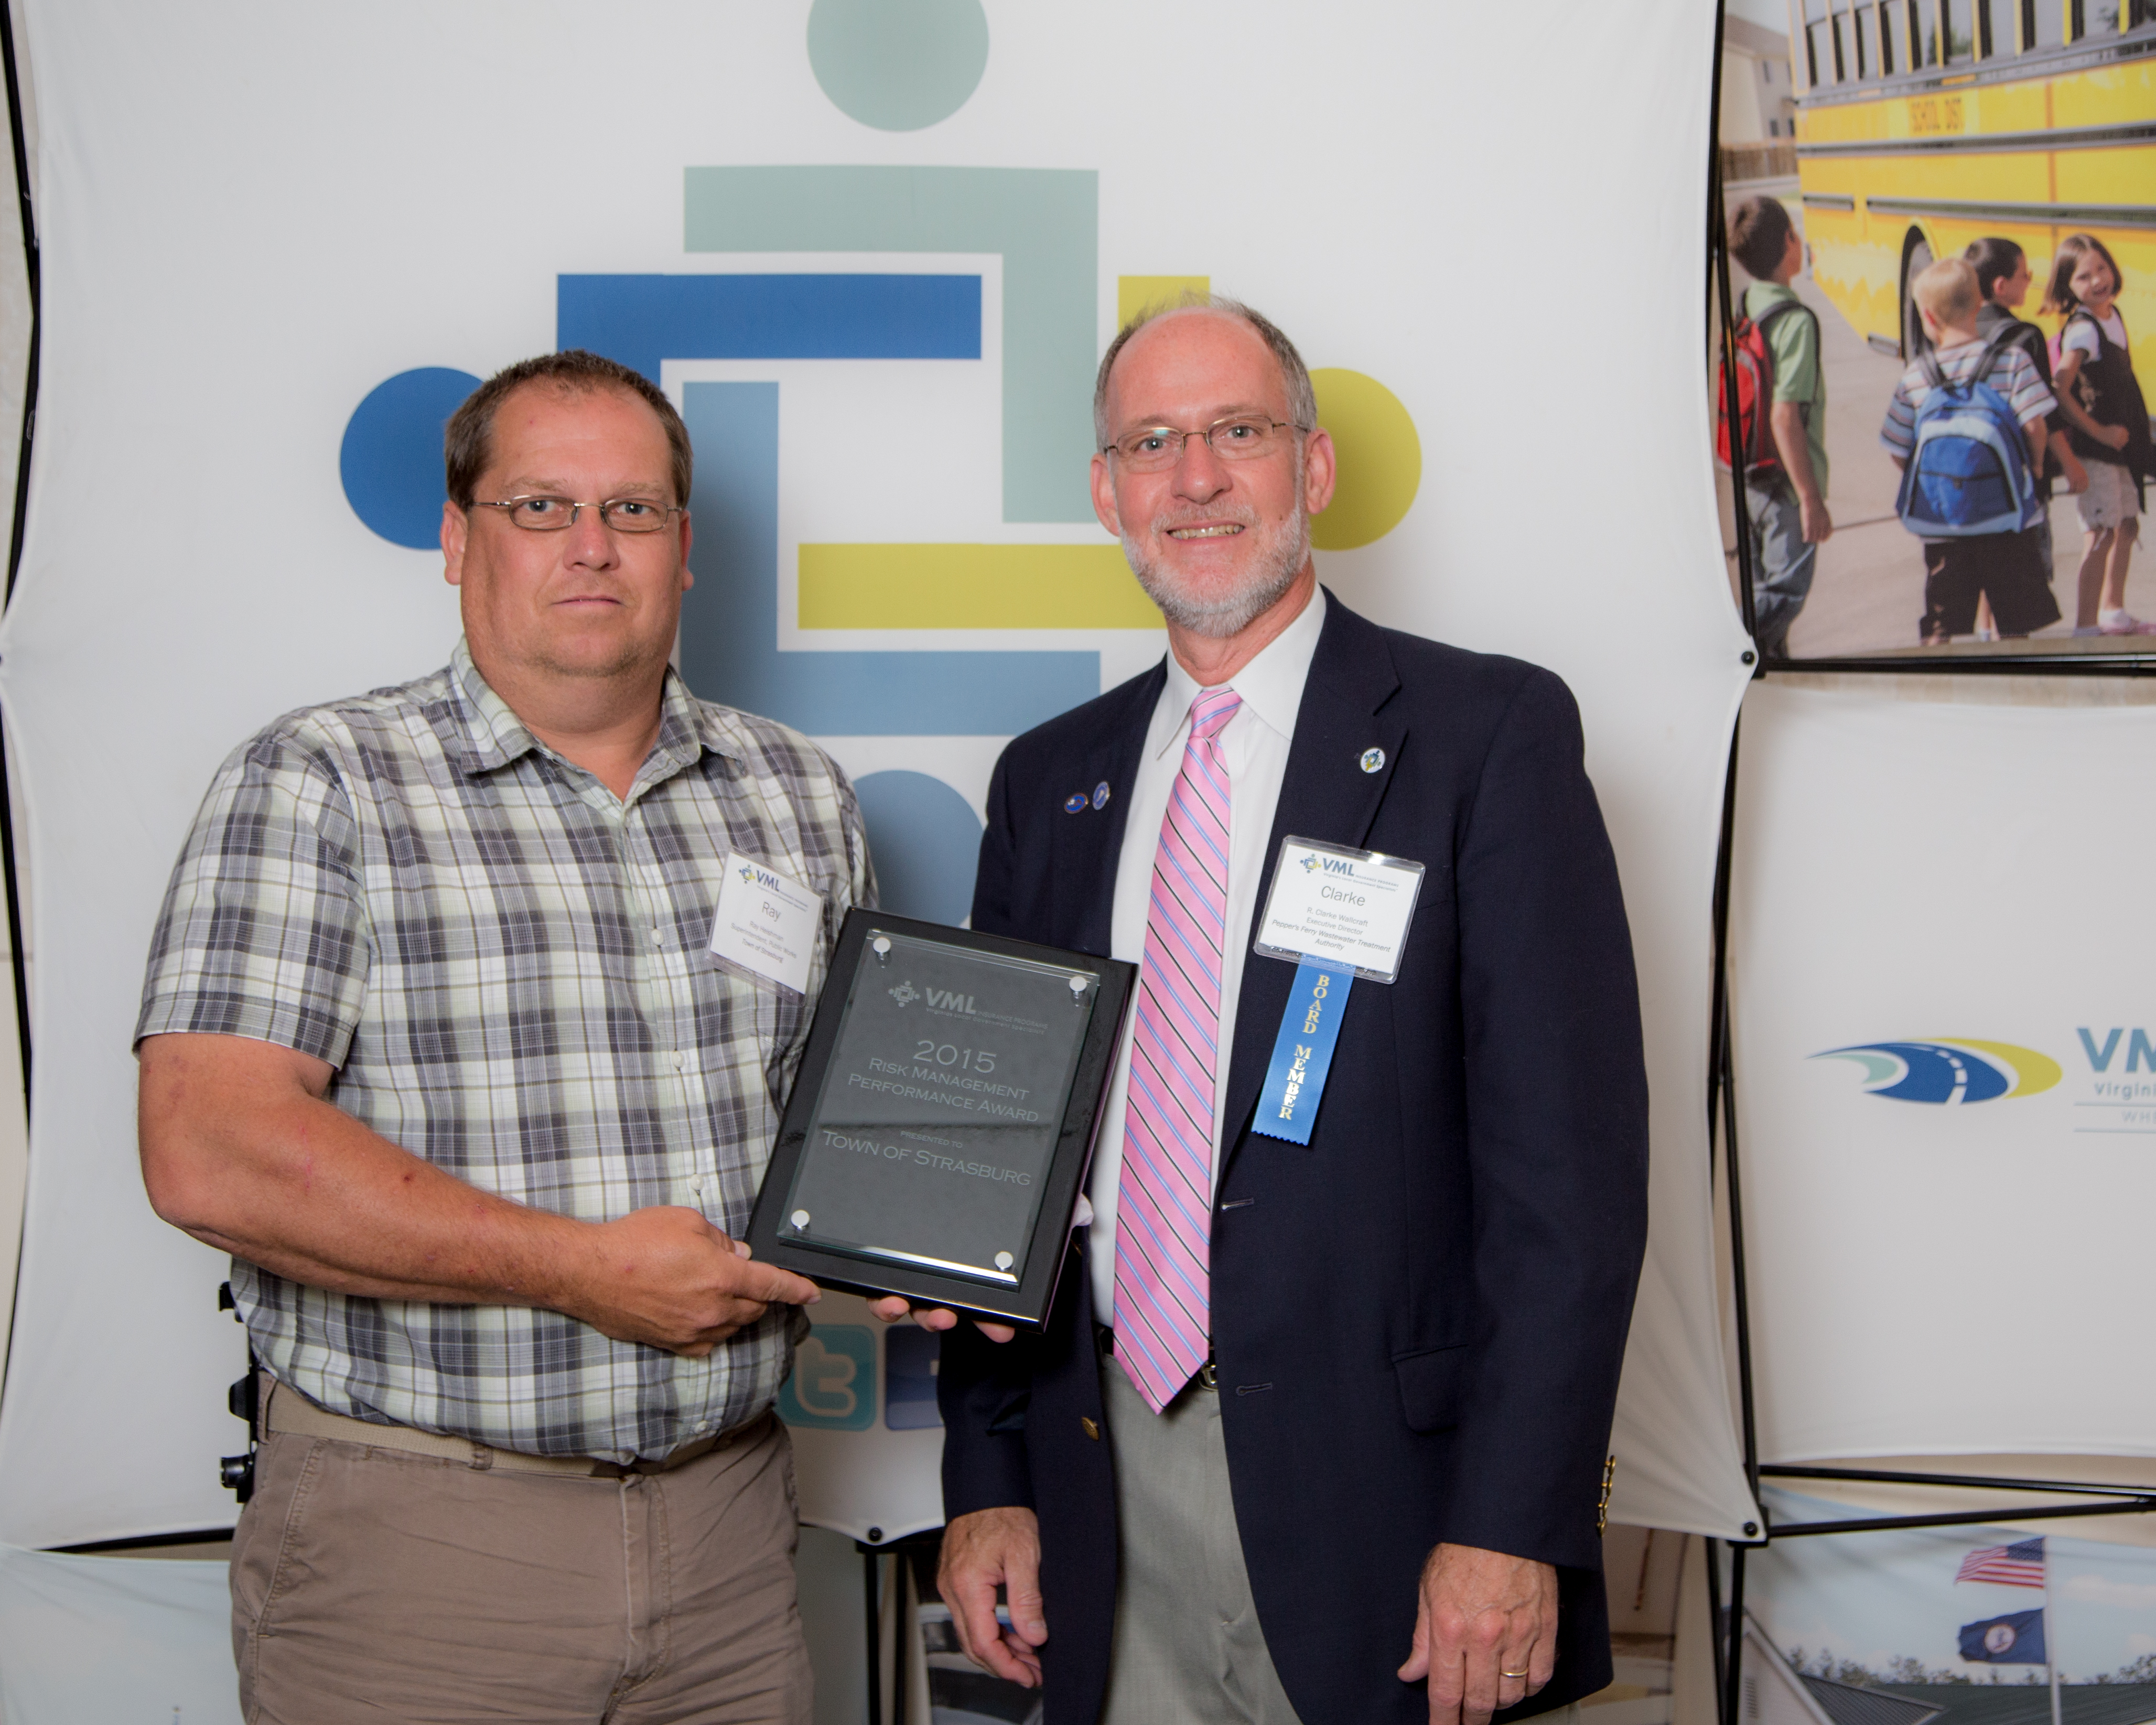 (L to R): Superintendent of Public Works, Ray Heischman, with the Town of Strasburg accepts the award with VMLIP Members’ Supervisory Board Member Clarke Wallcraft 